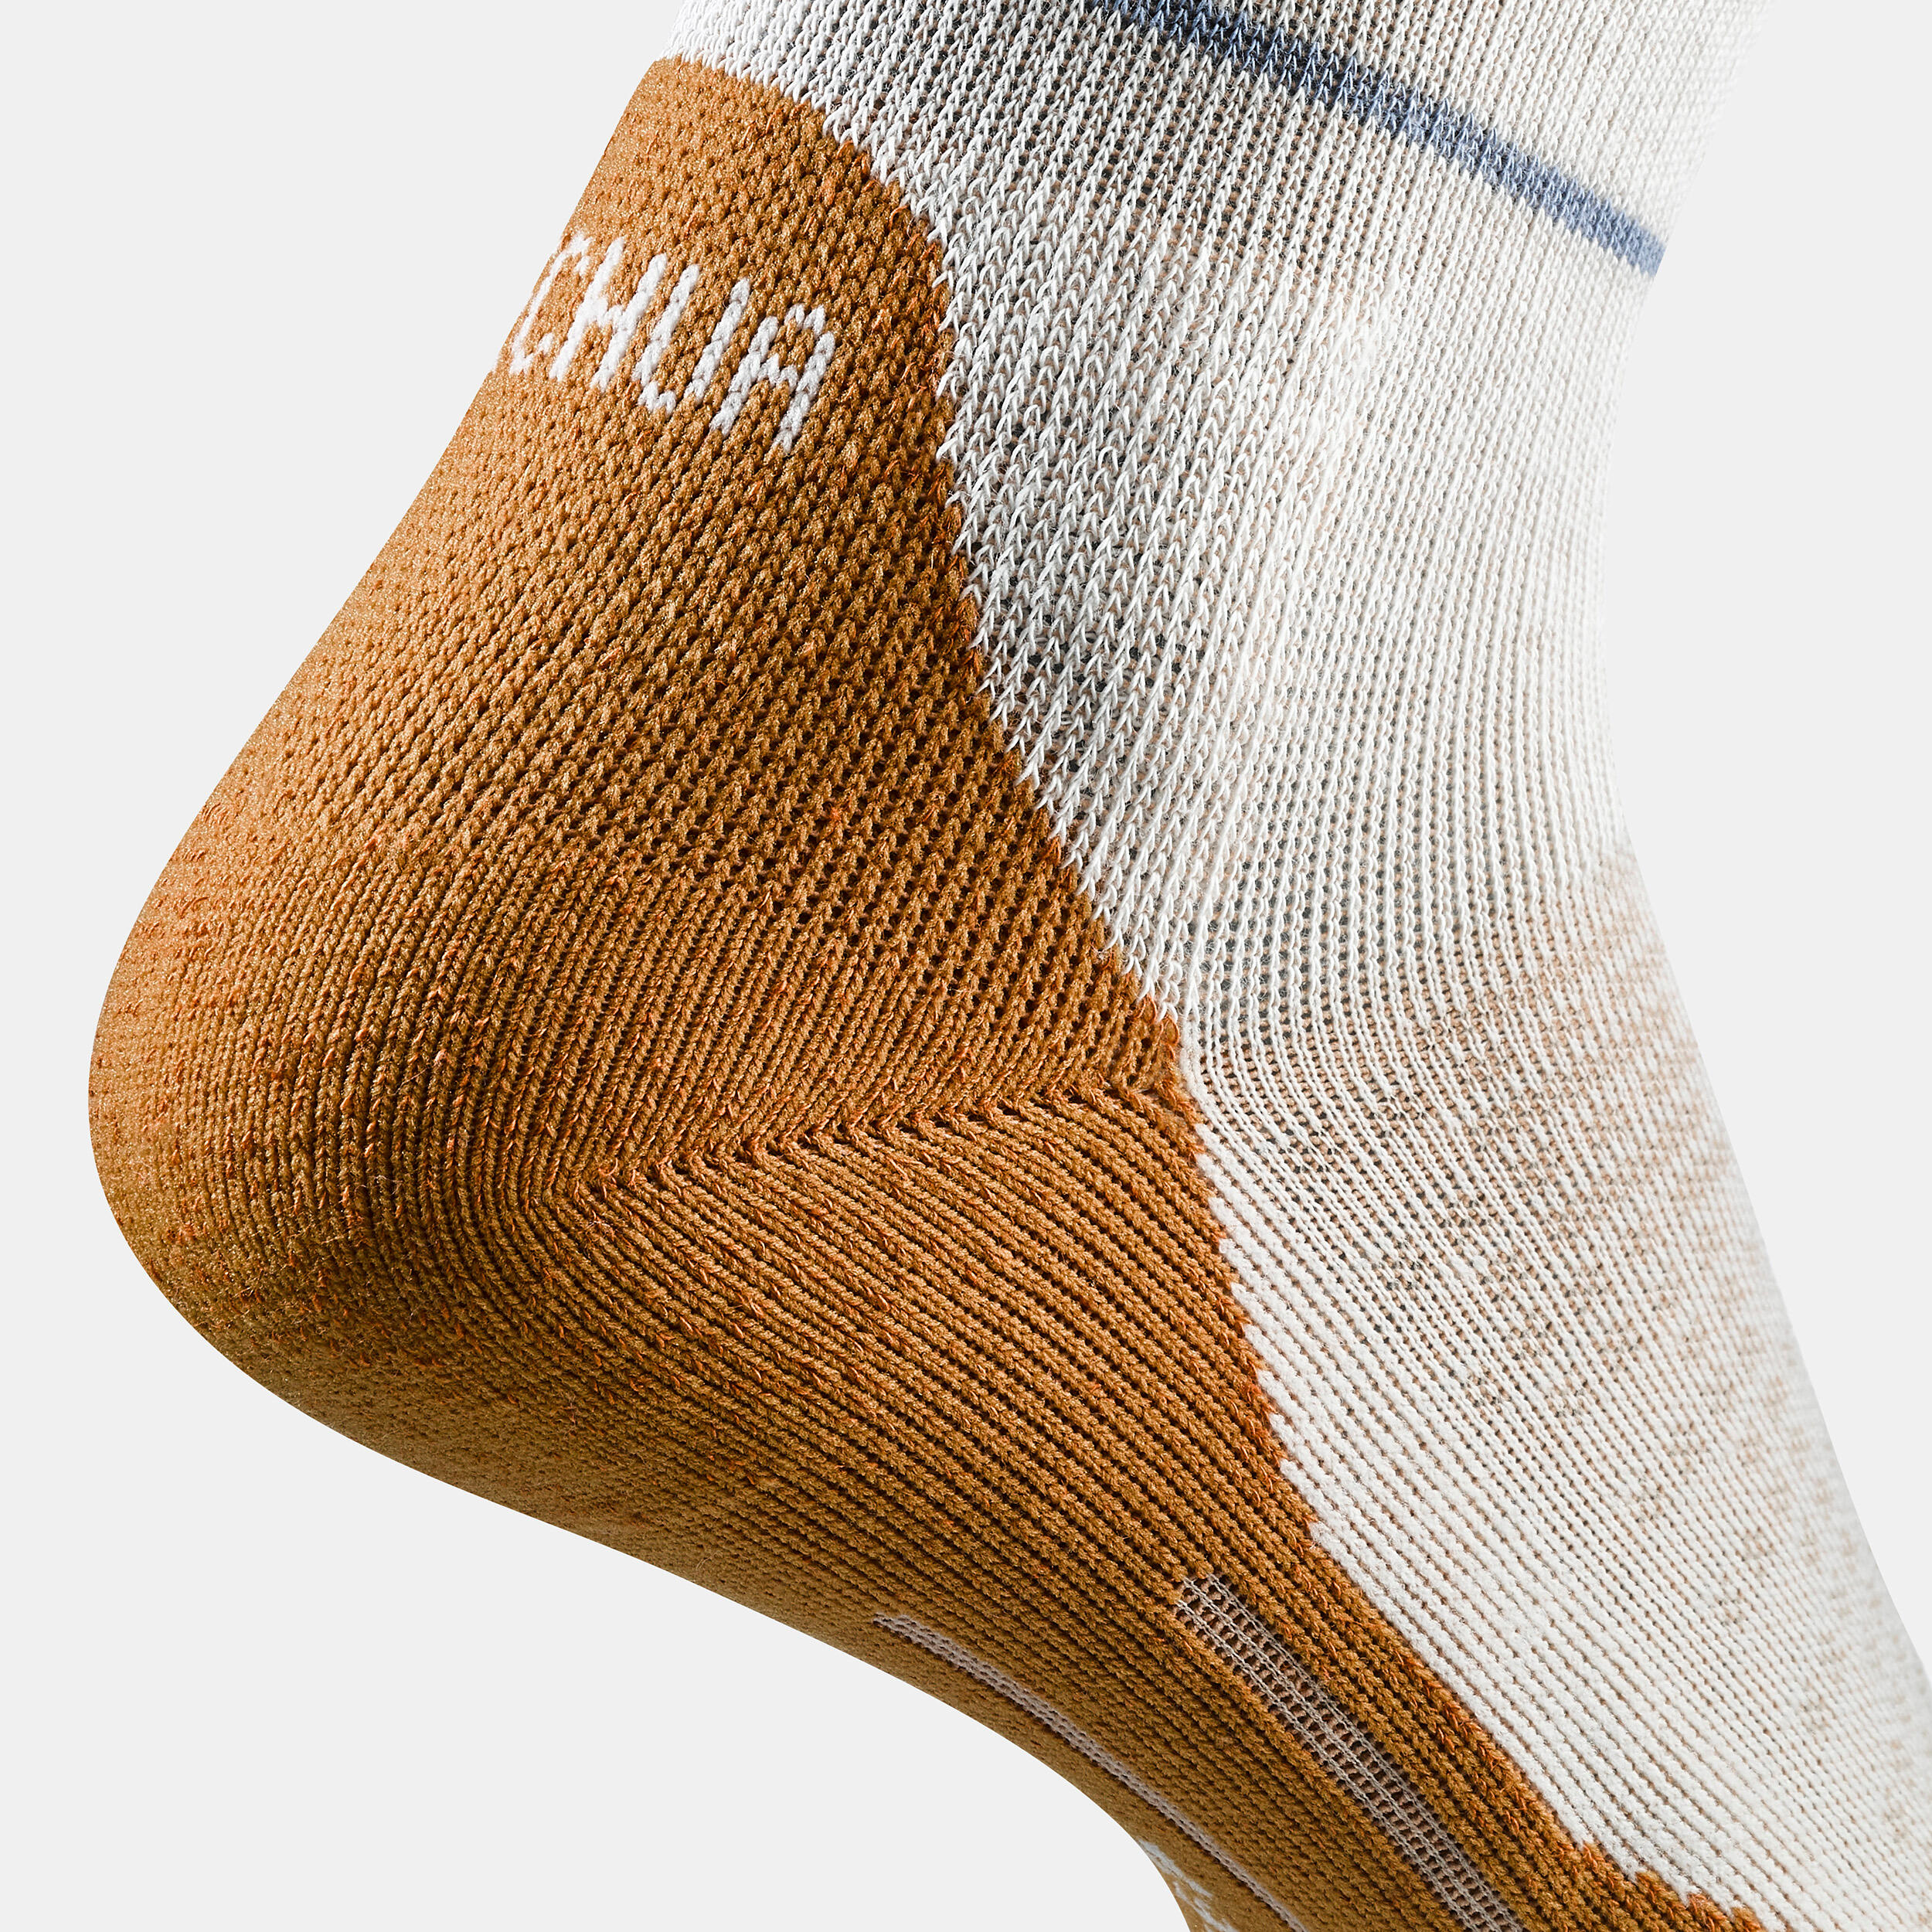 Hike 100 High Socks  - Trendy stripes and blue - Pack of 2 pairs 9/9